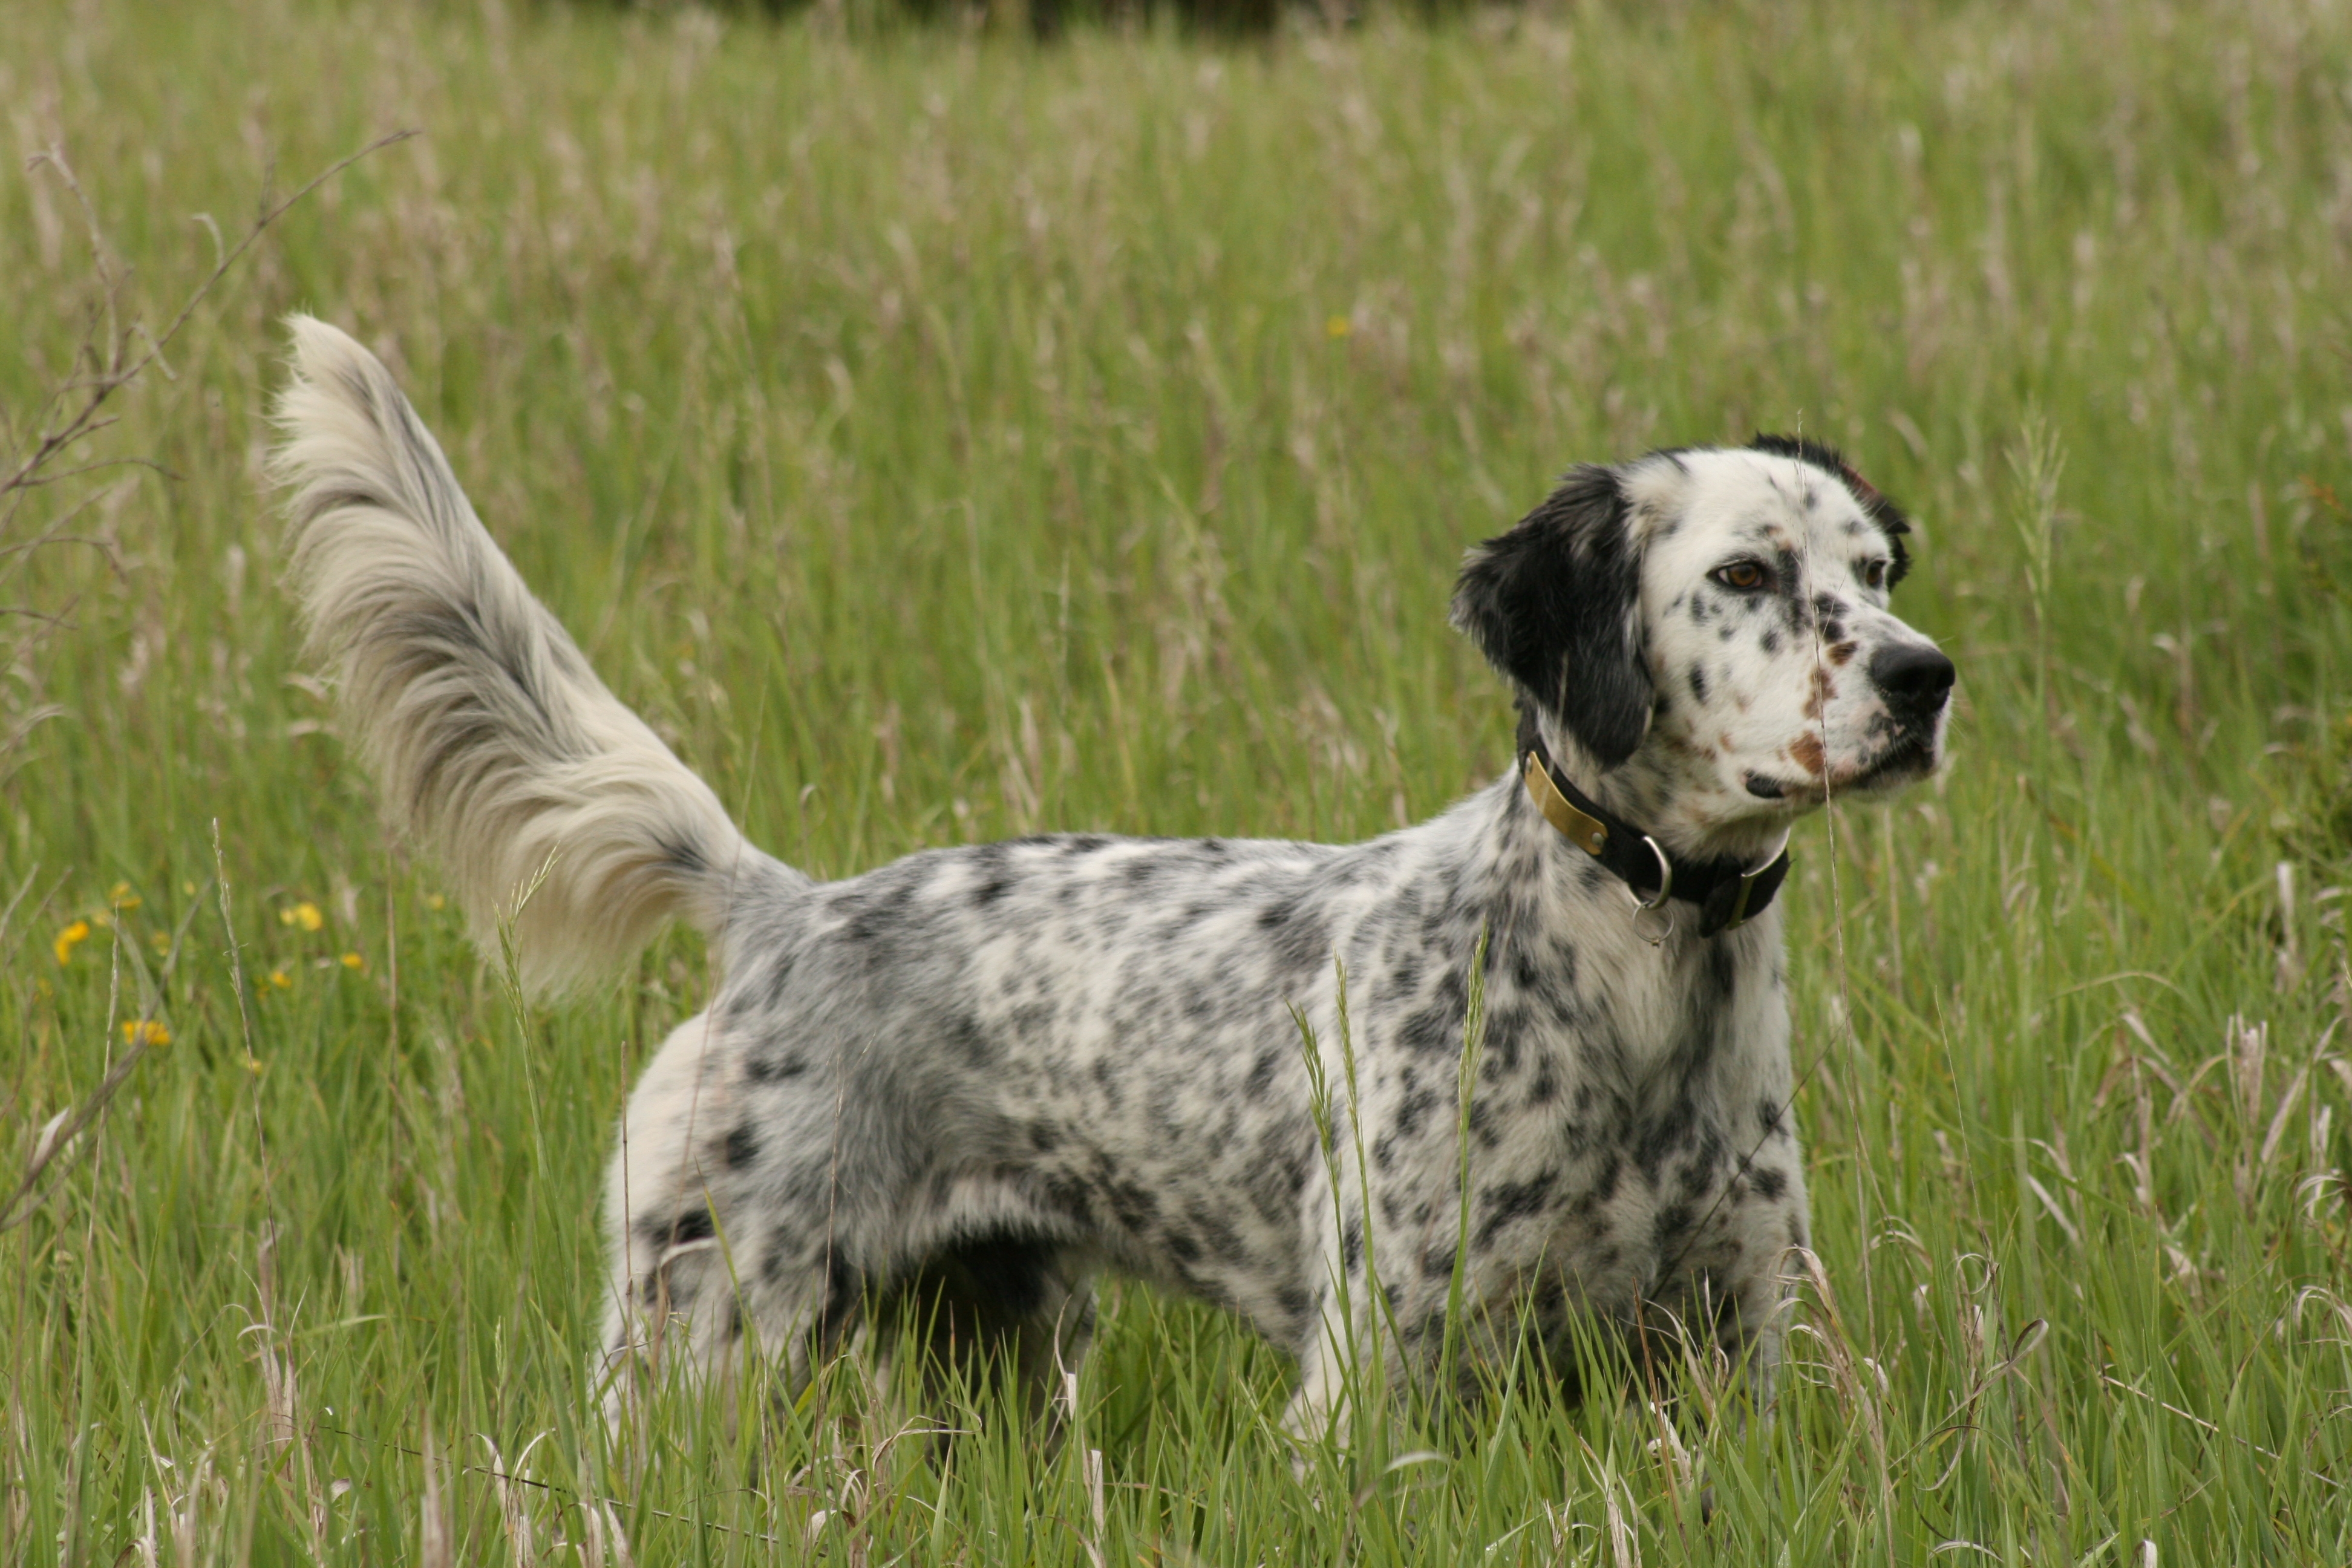 English Setter Breed Guide - Learn about the English Setter.